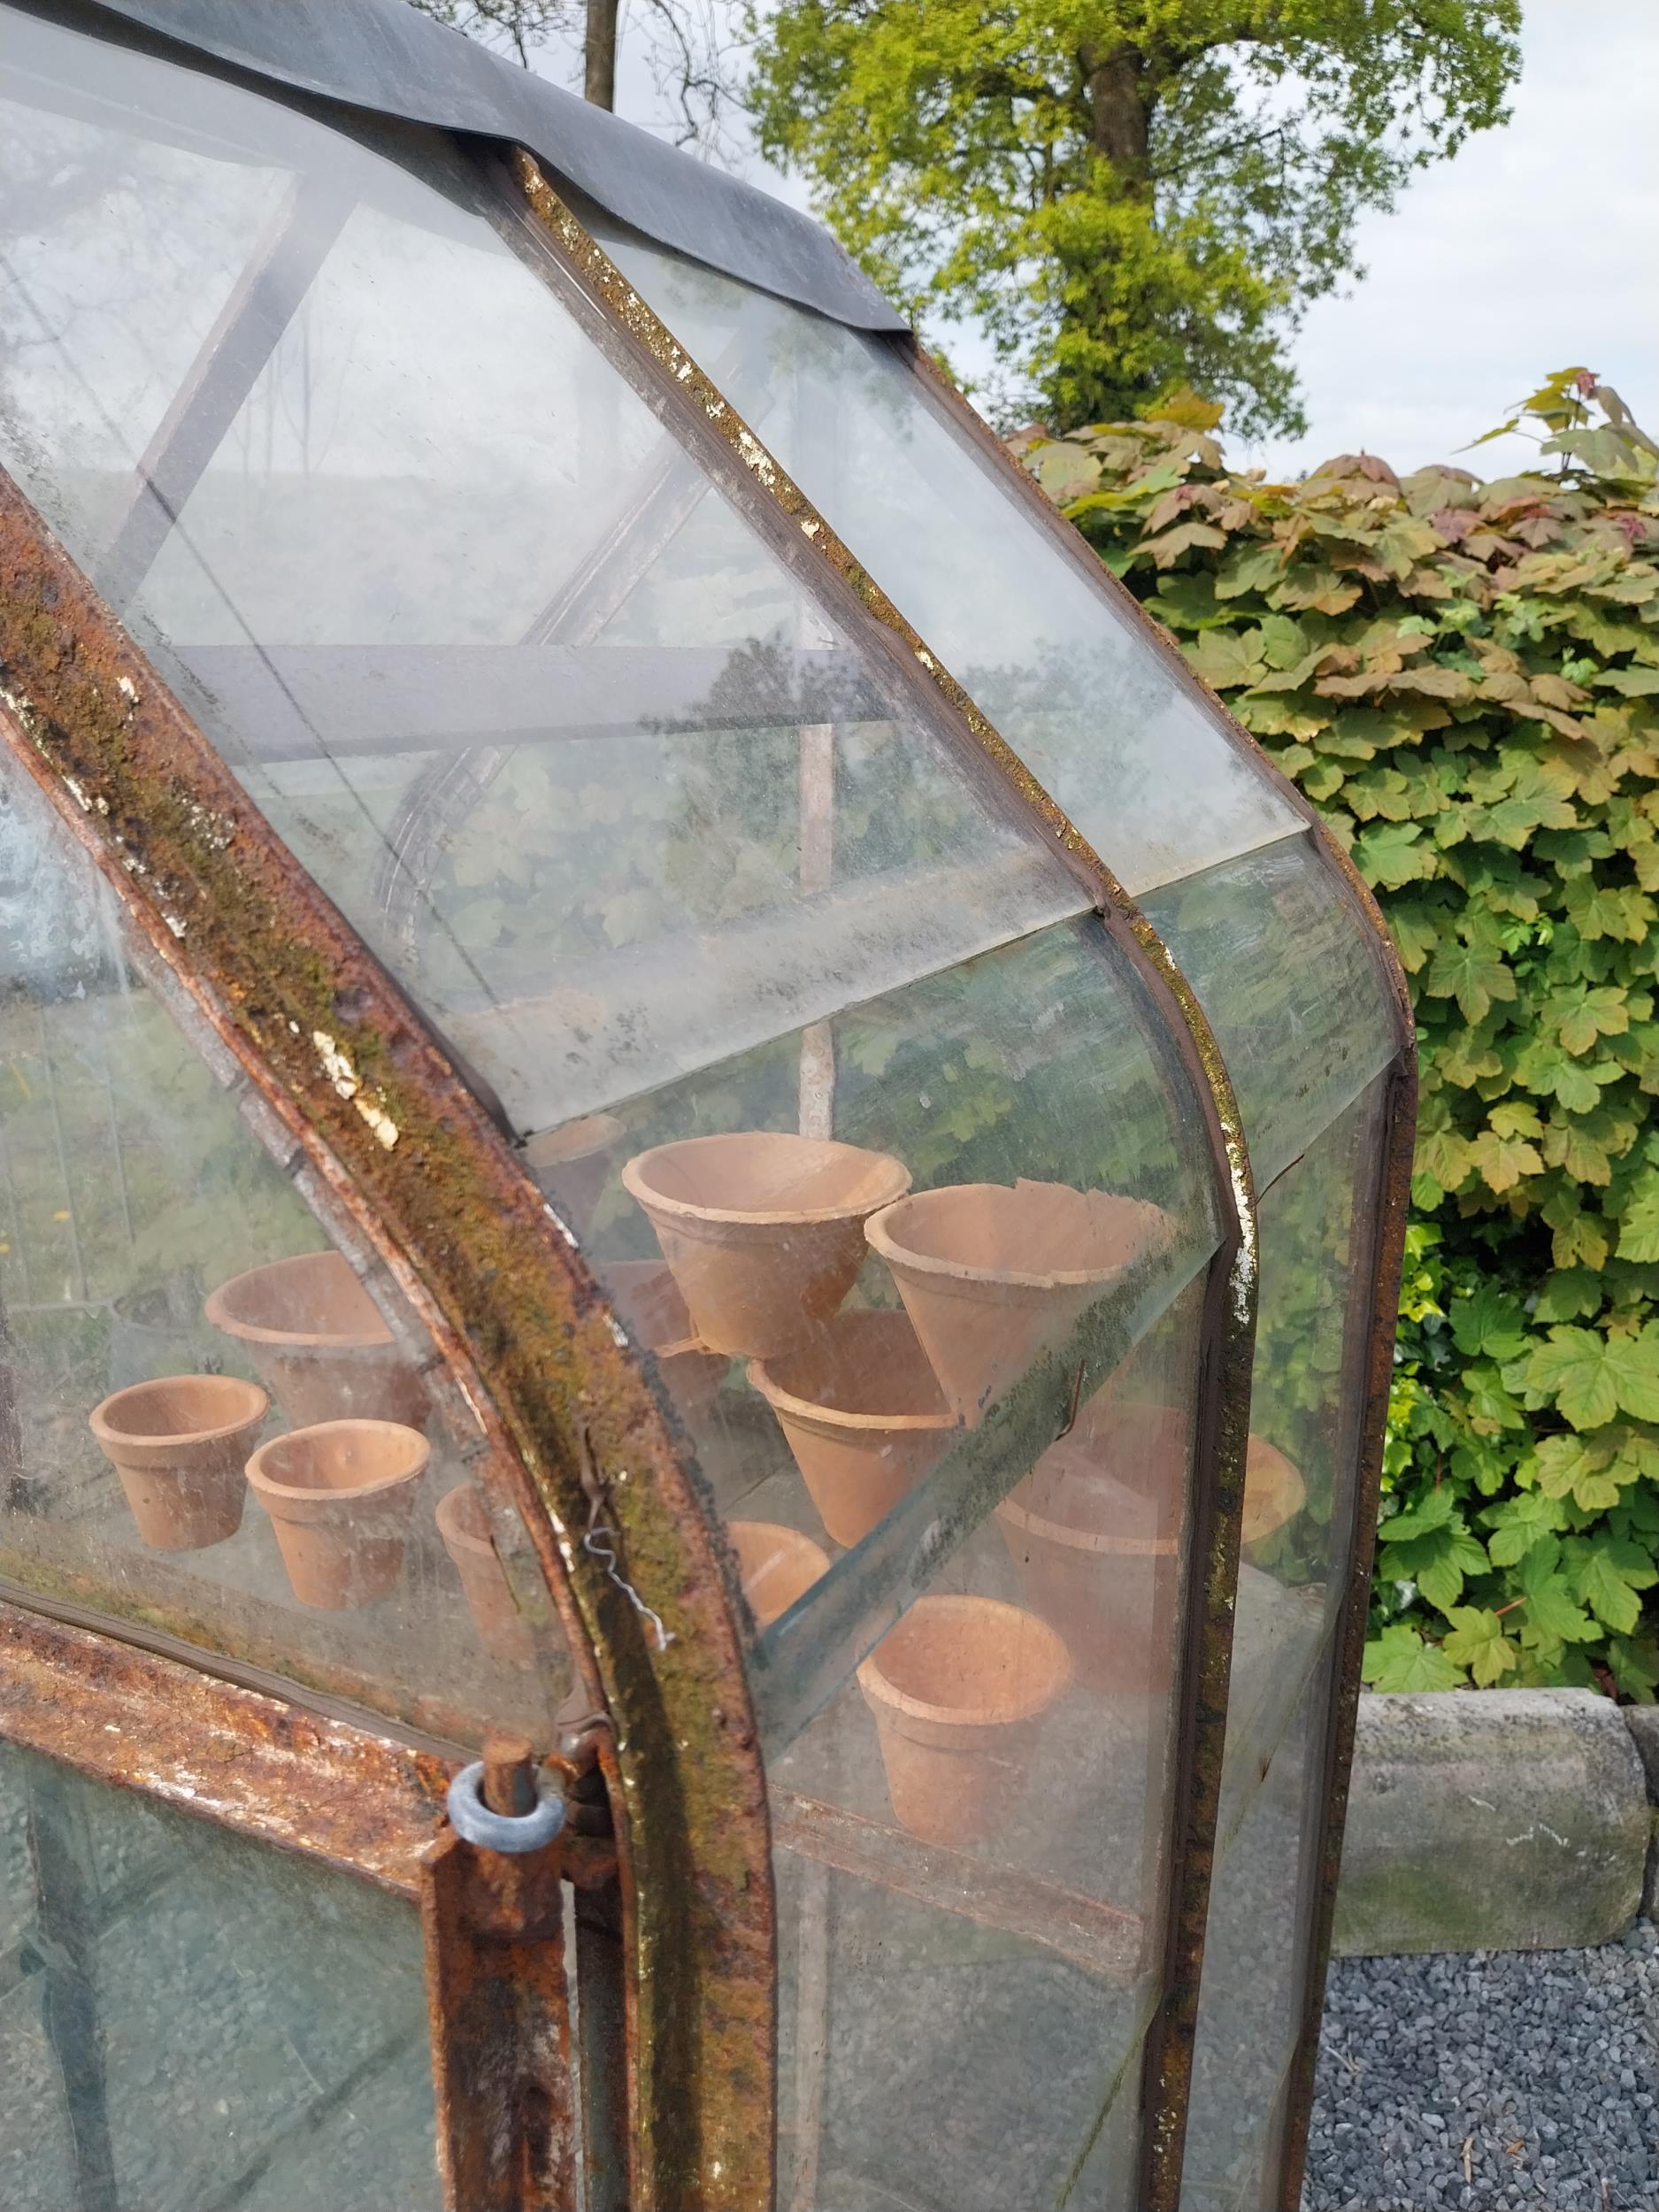 Early 20th C. French wrought iron greenhouse {174 cm H x 70 cm W x 74 cm D}. - Image 5 of 5